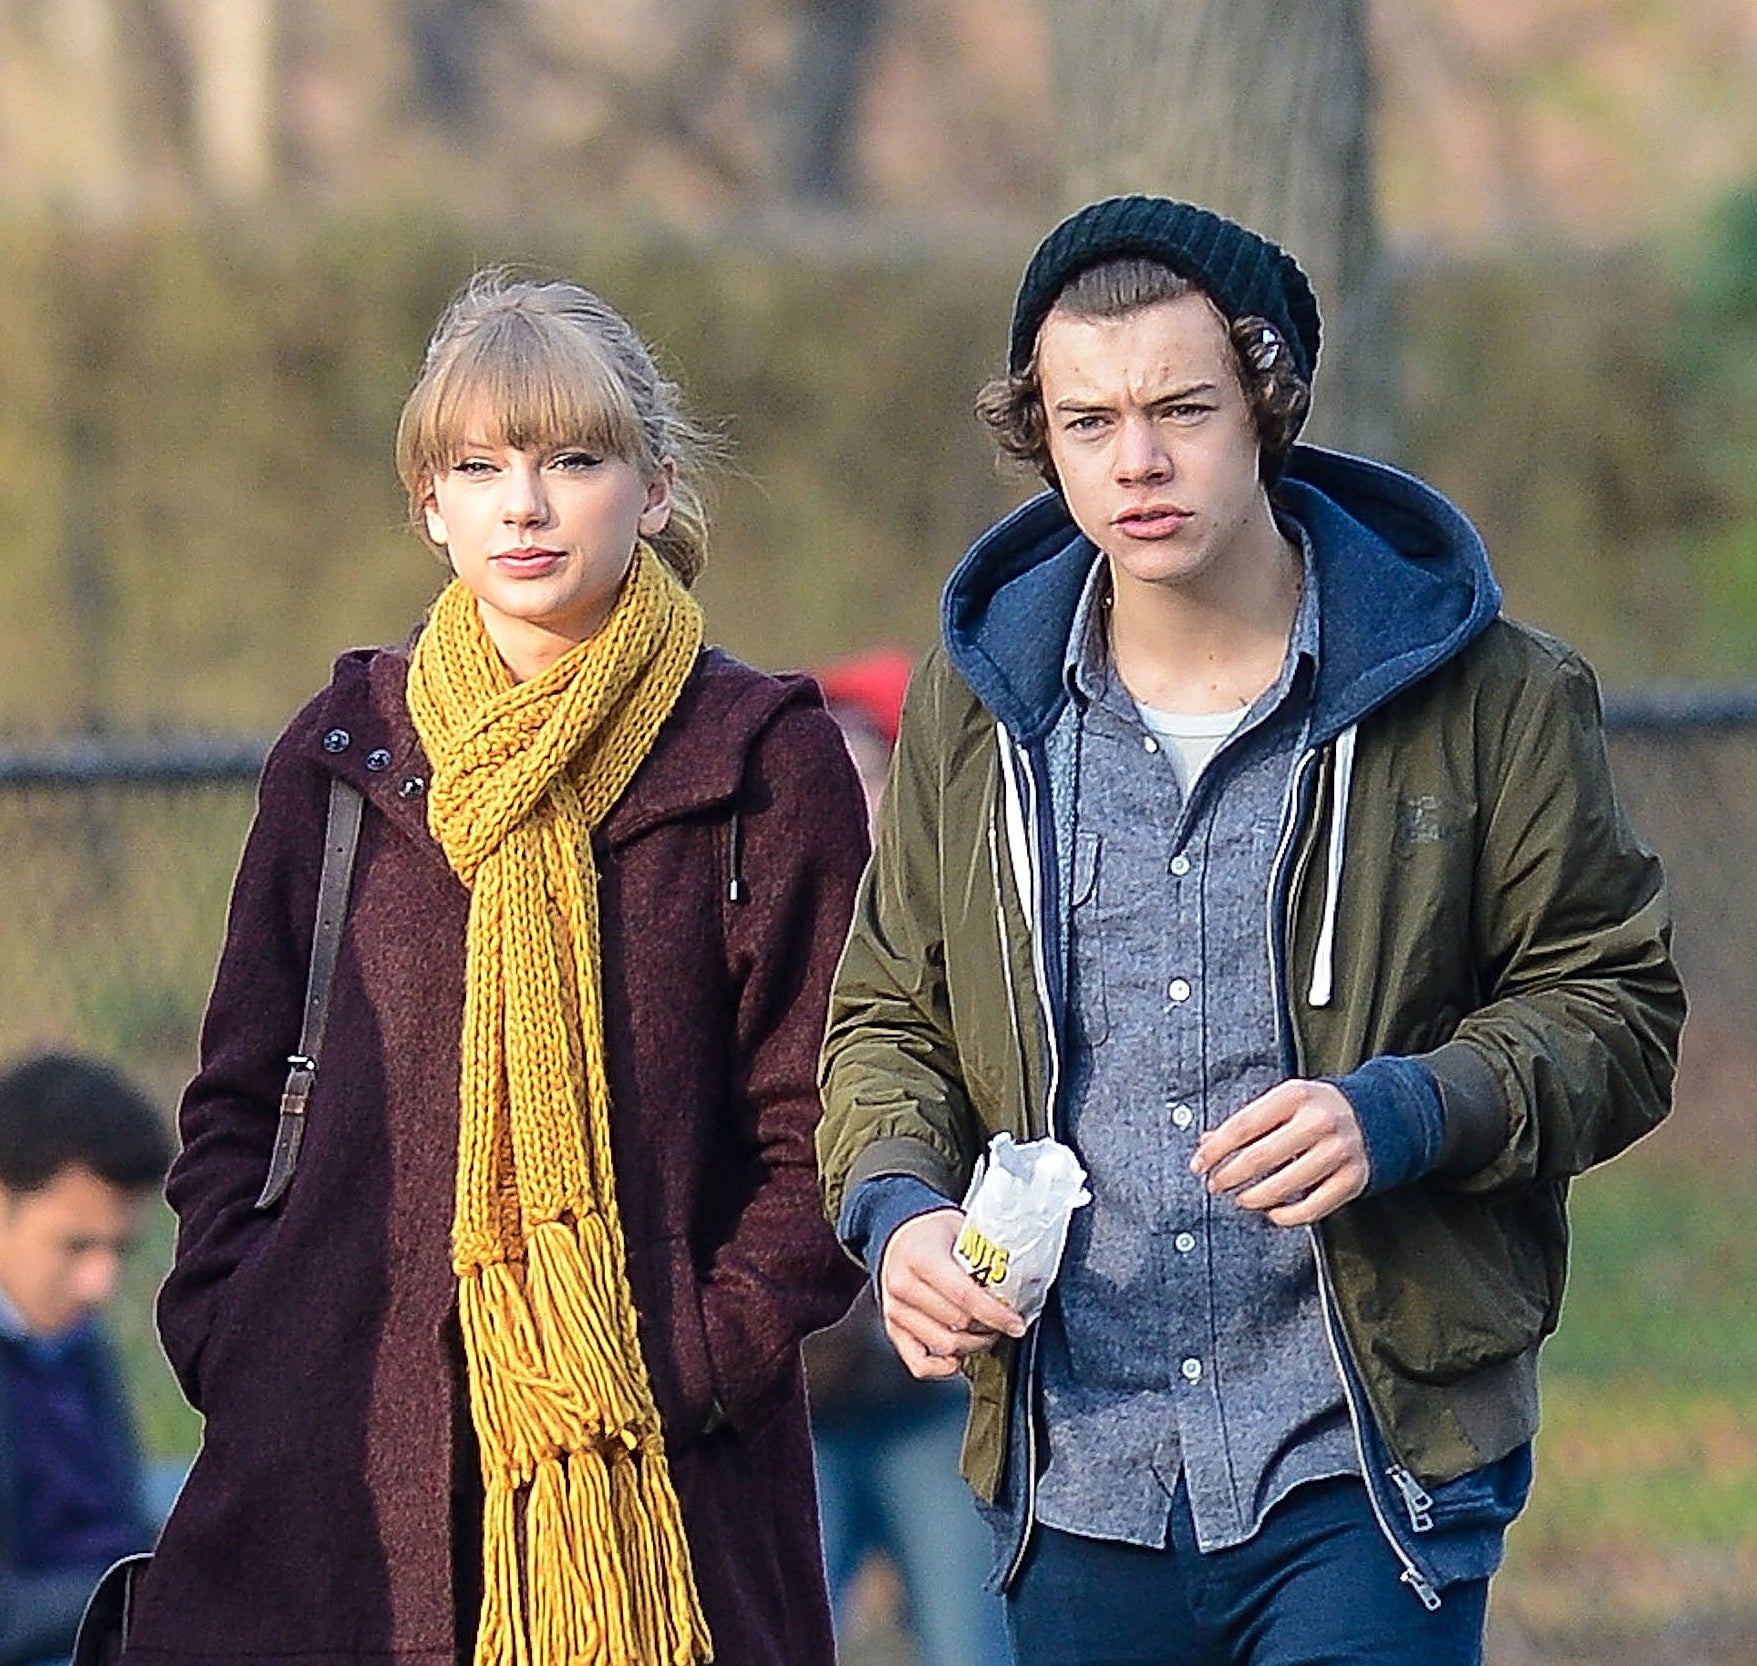 Close-up of Taylor and Harry wearing coats/jackets outside